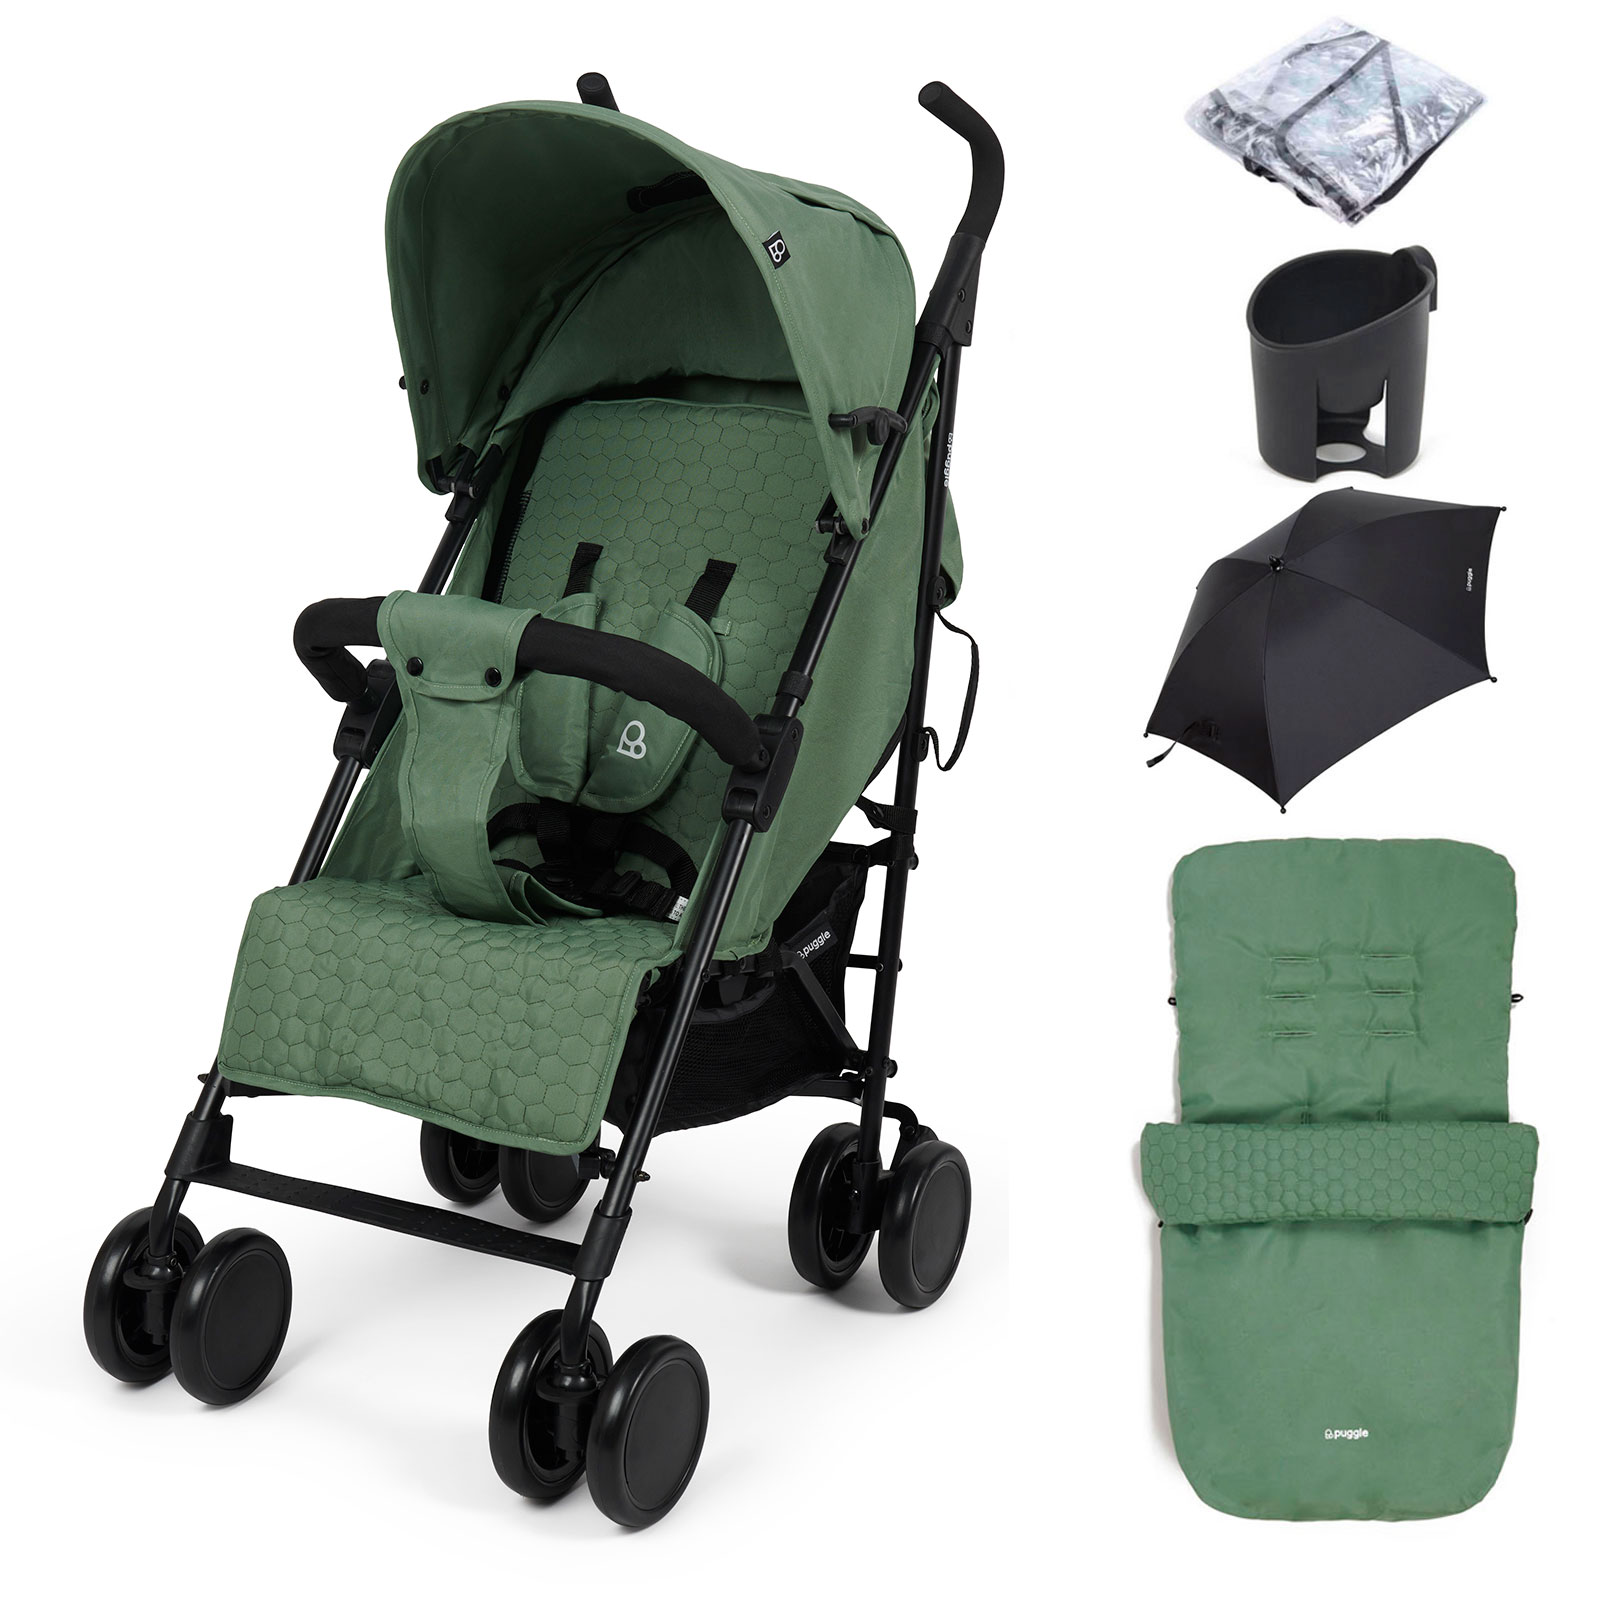 Puggle Litemax Pushchair Stroller with Raincover, Cupholder, Universal Footmuff and Parasol - Sage Green